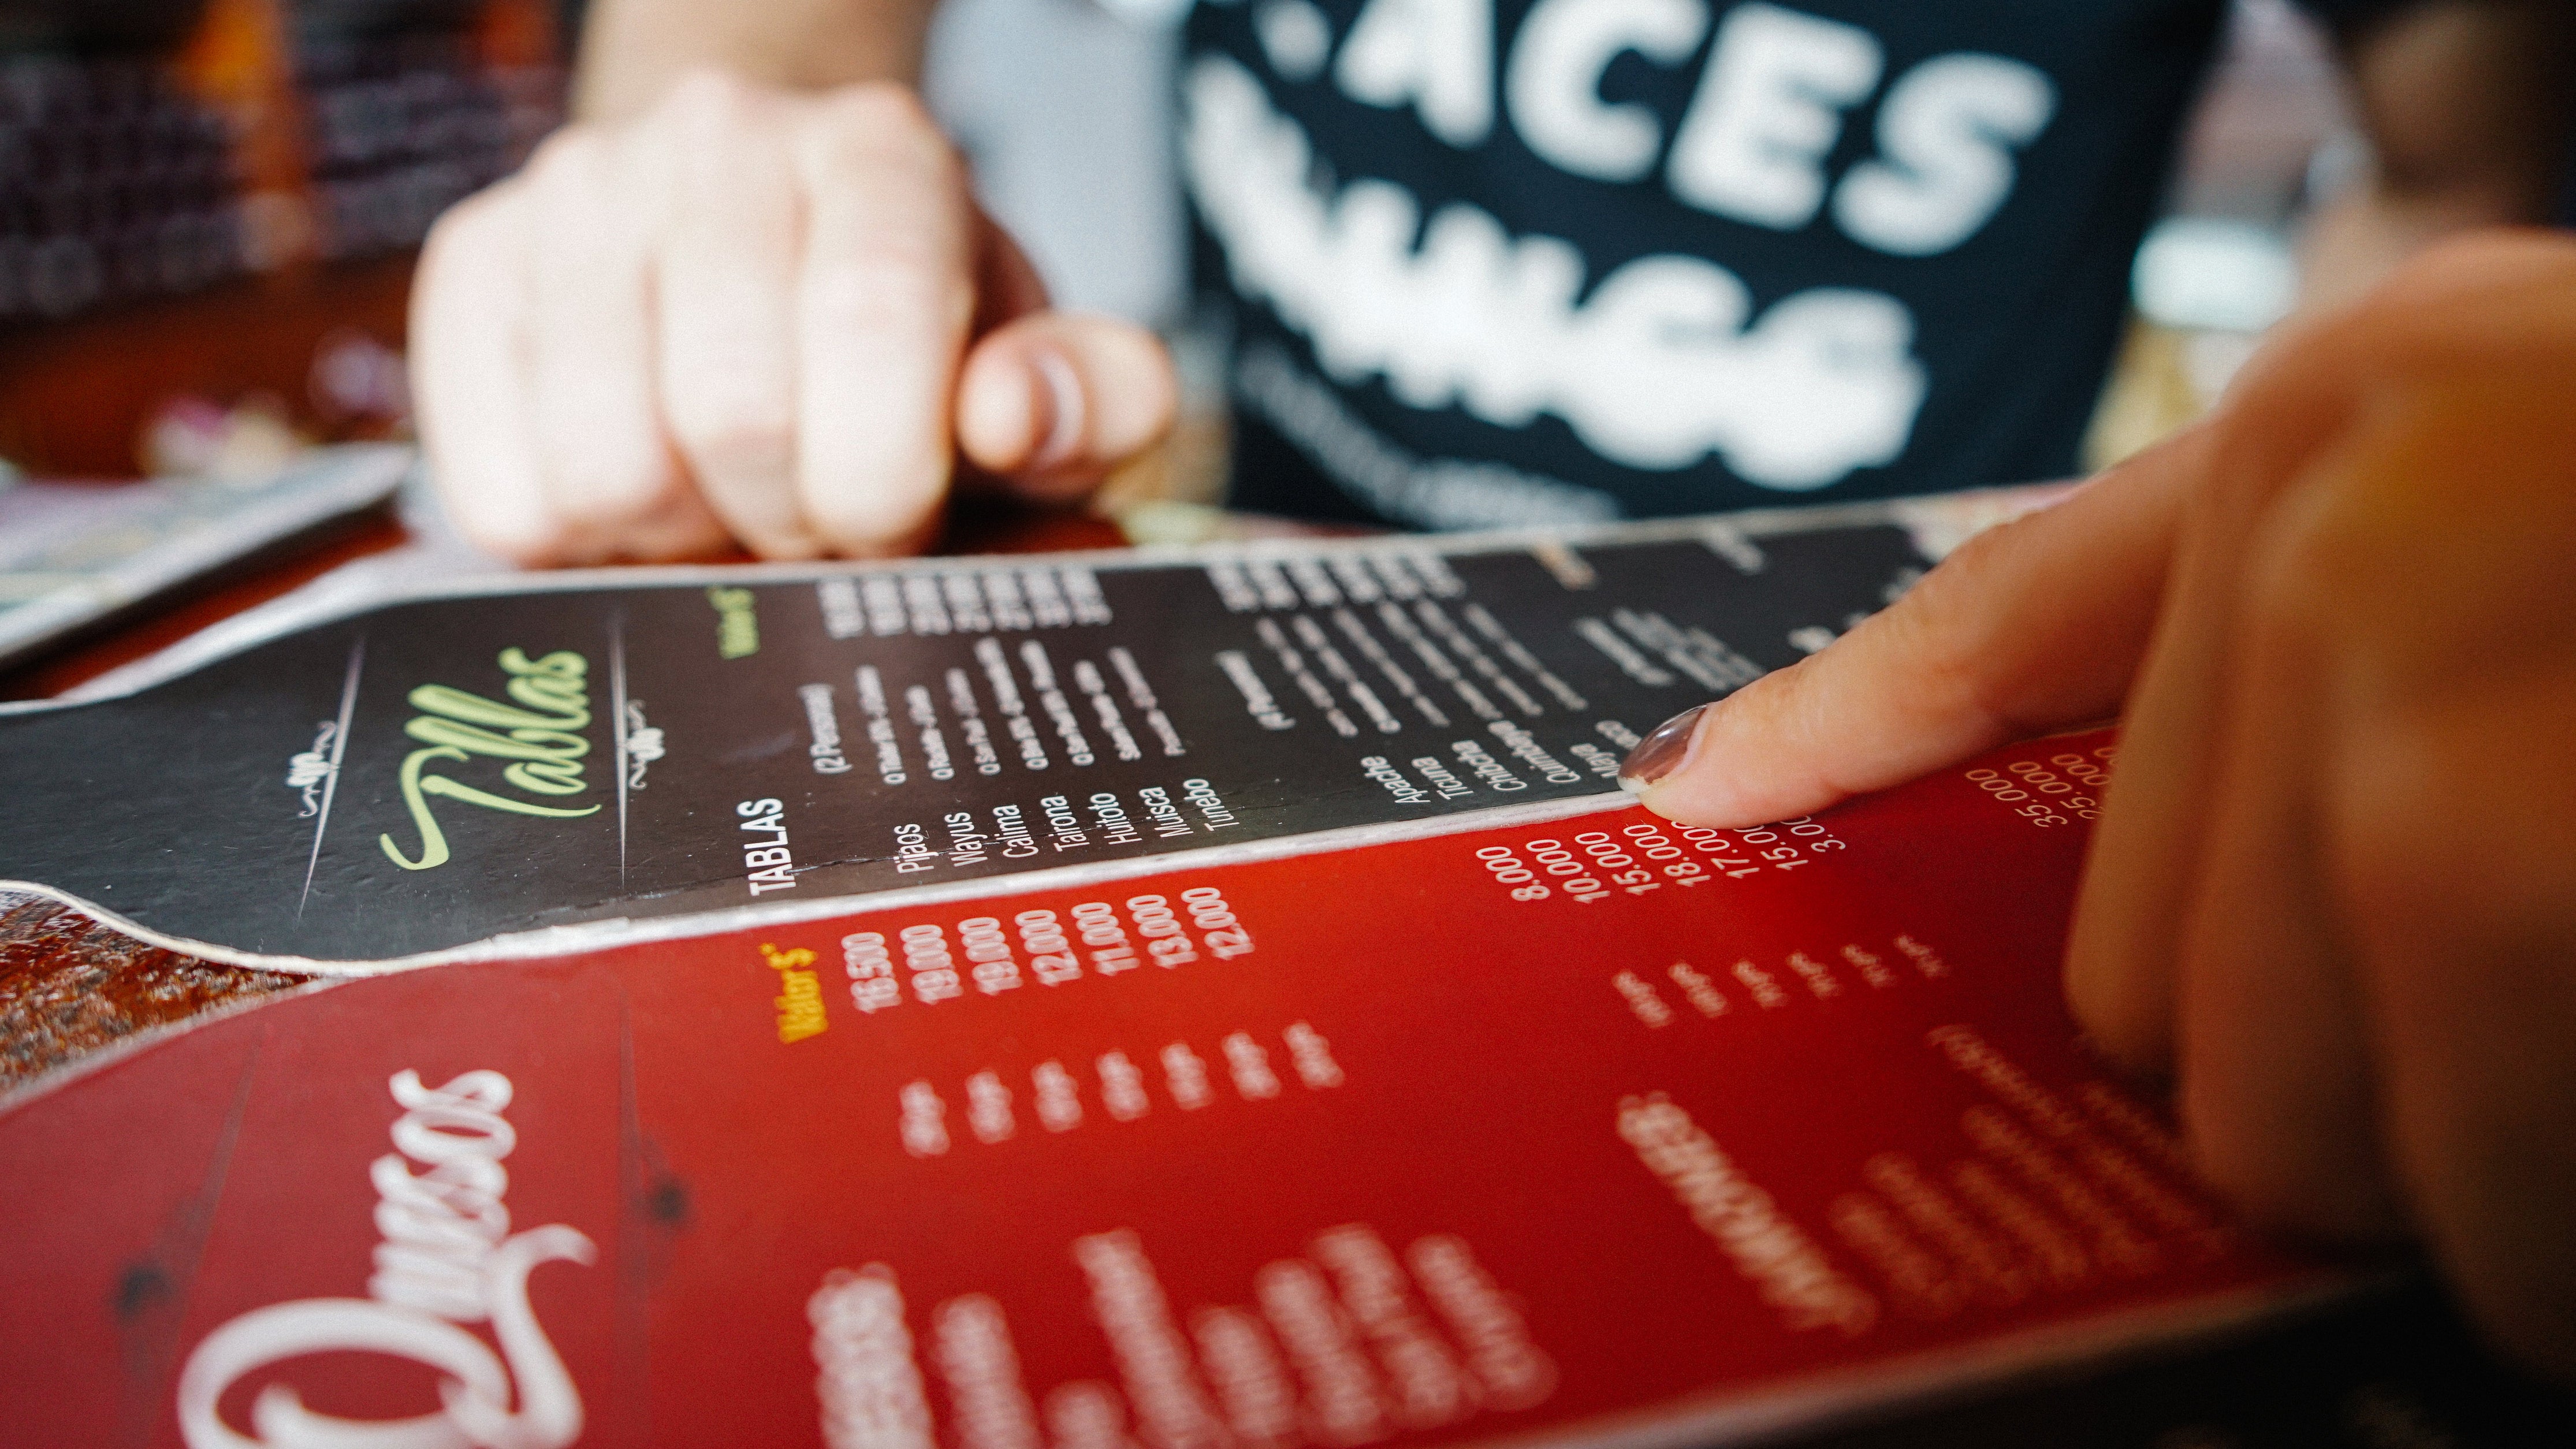 The Best Menu Building Practices For Food Businesses